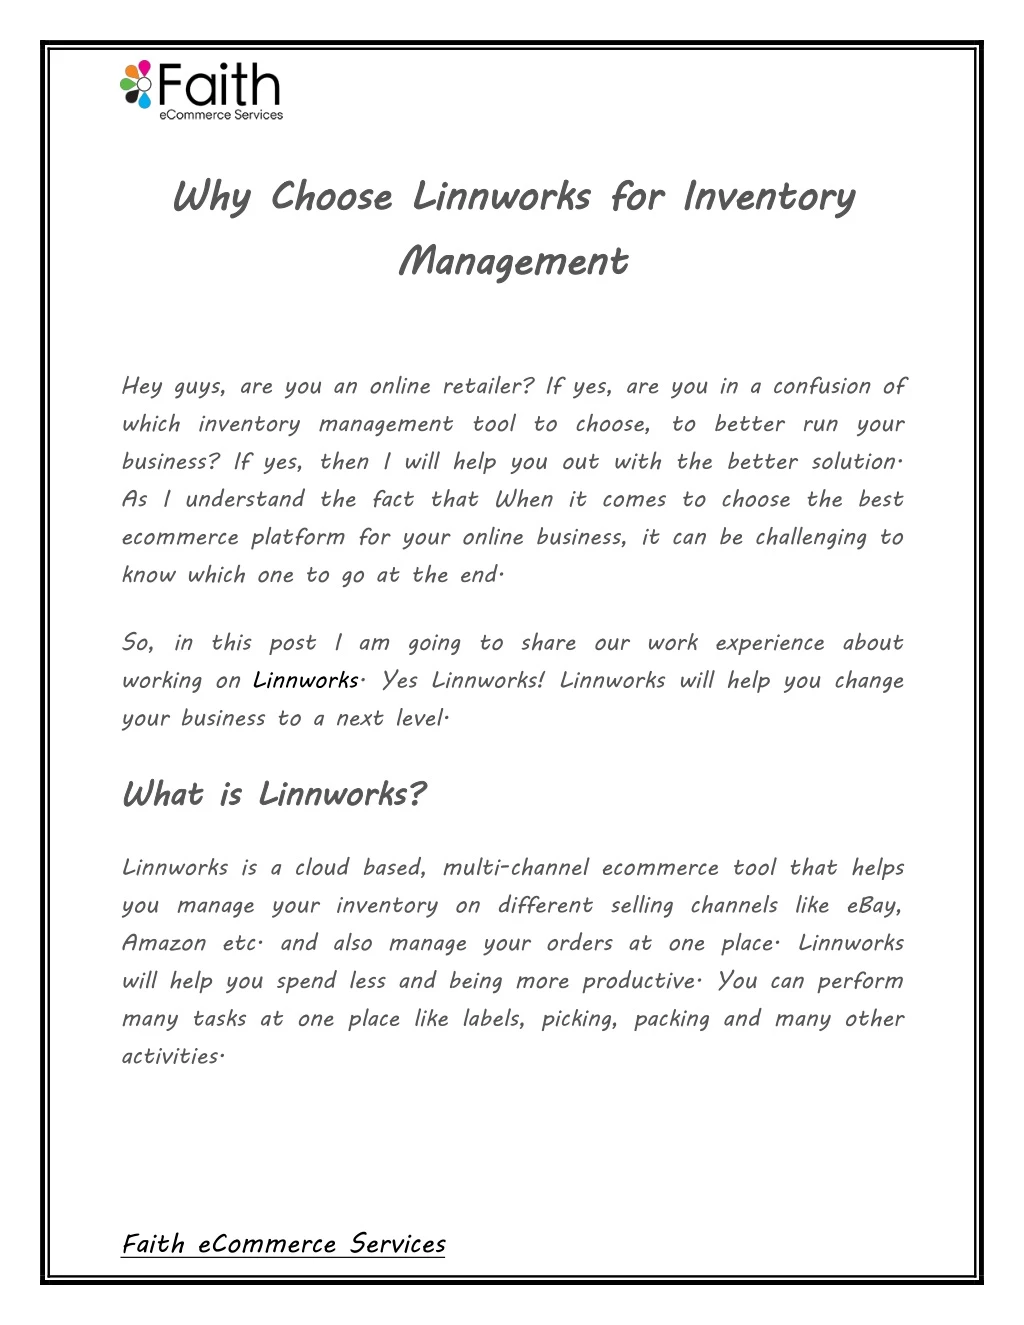 why choose linnworks for inventory management